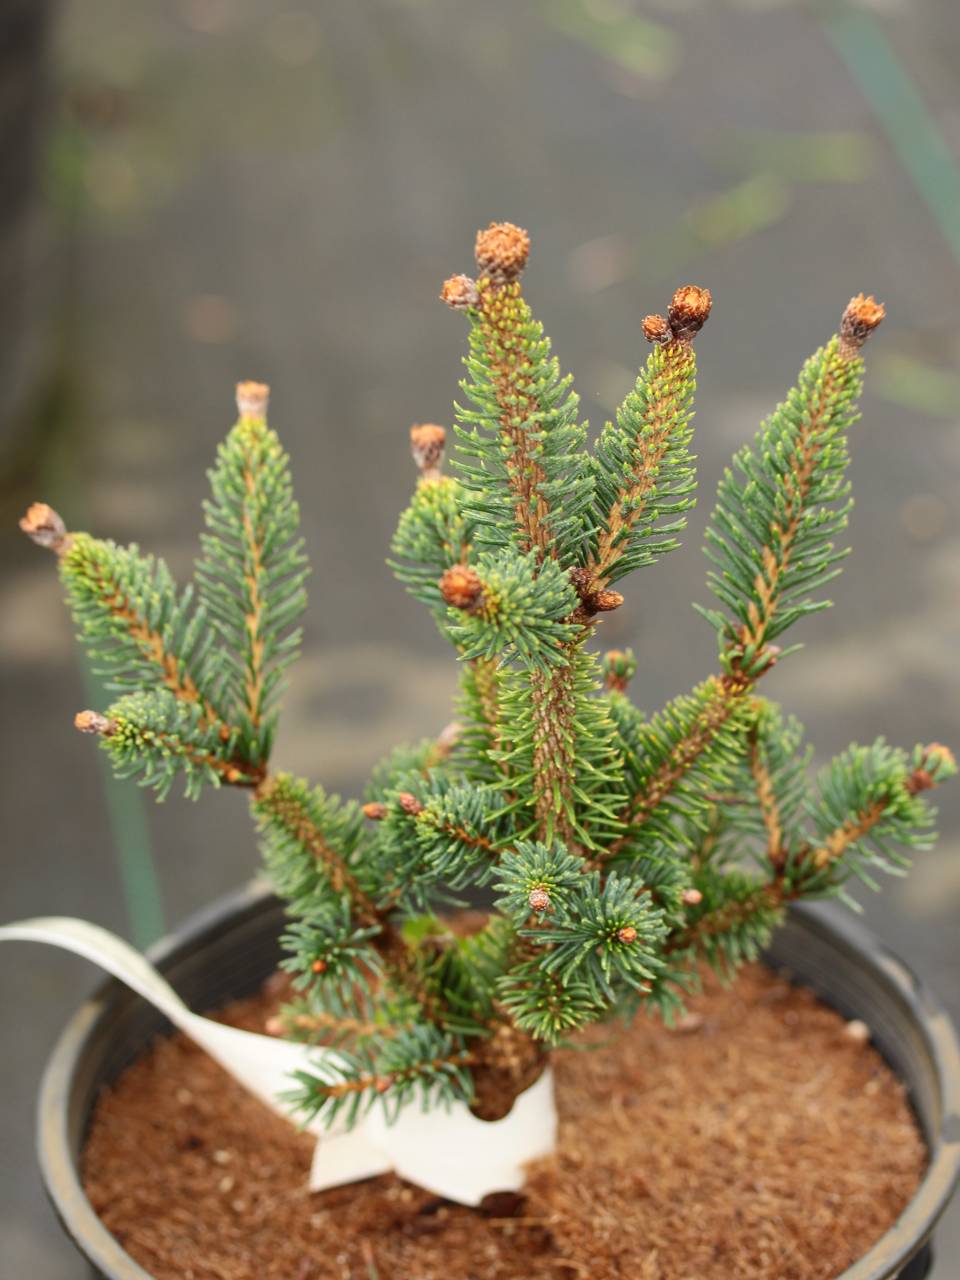 Picea glauca Little Monster conifer green needles structural miniature